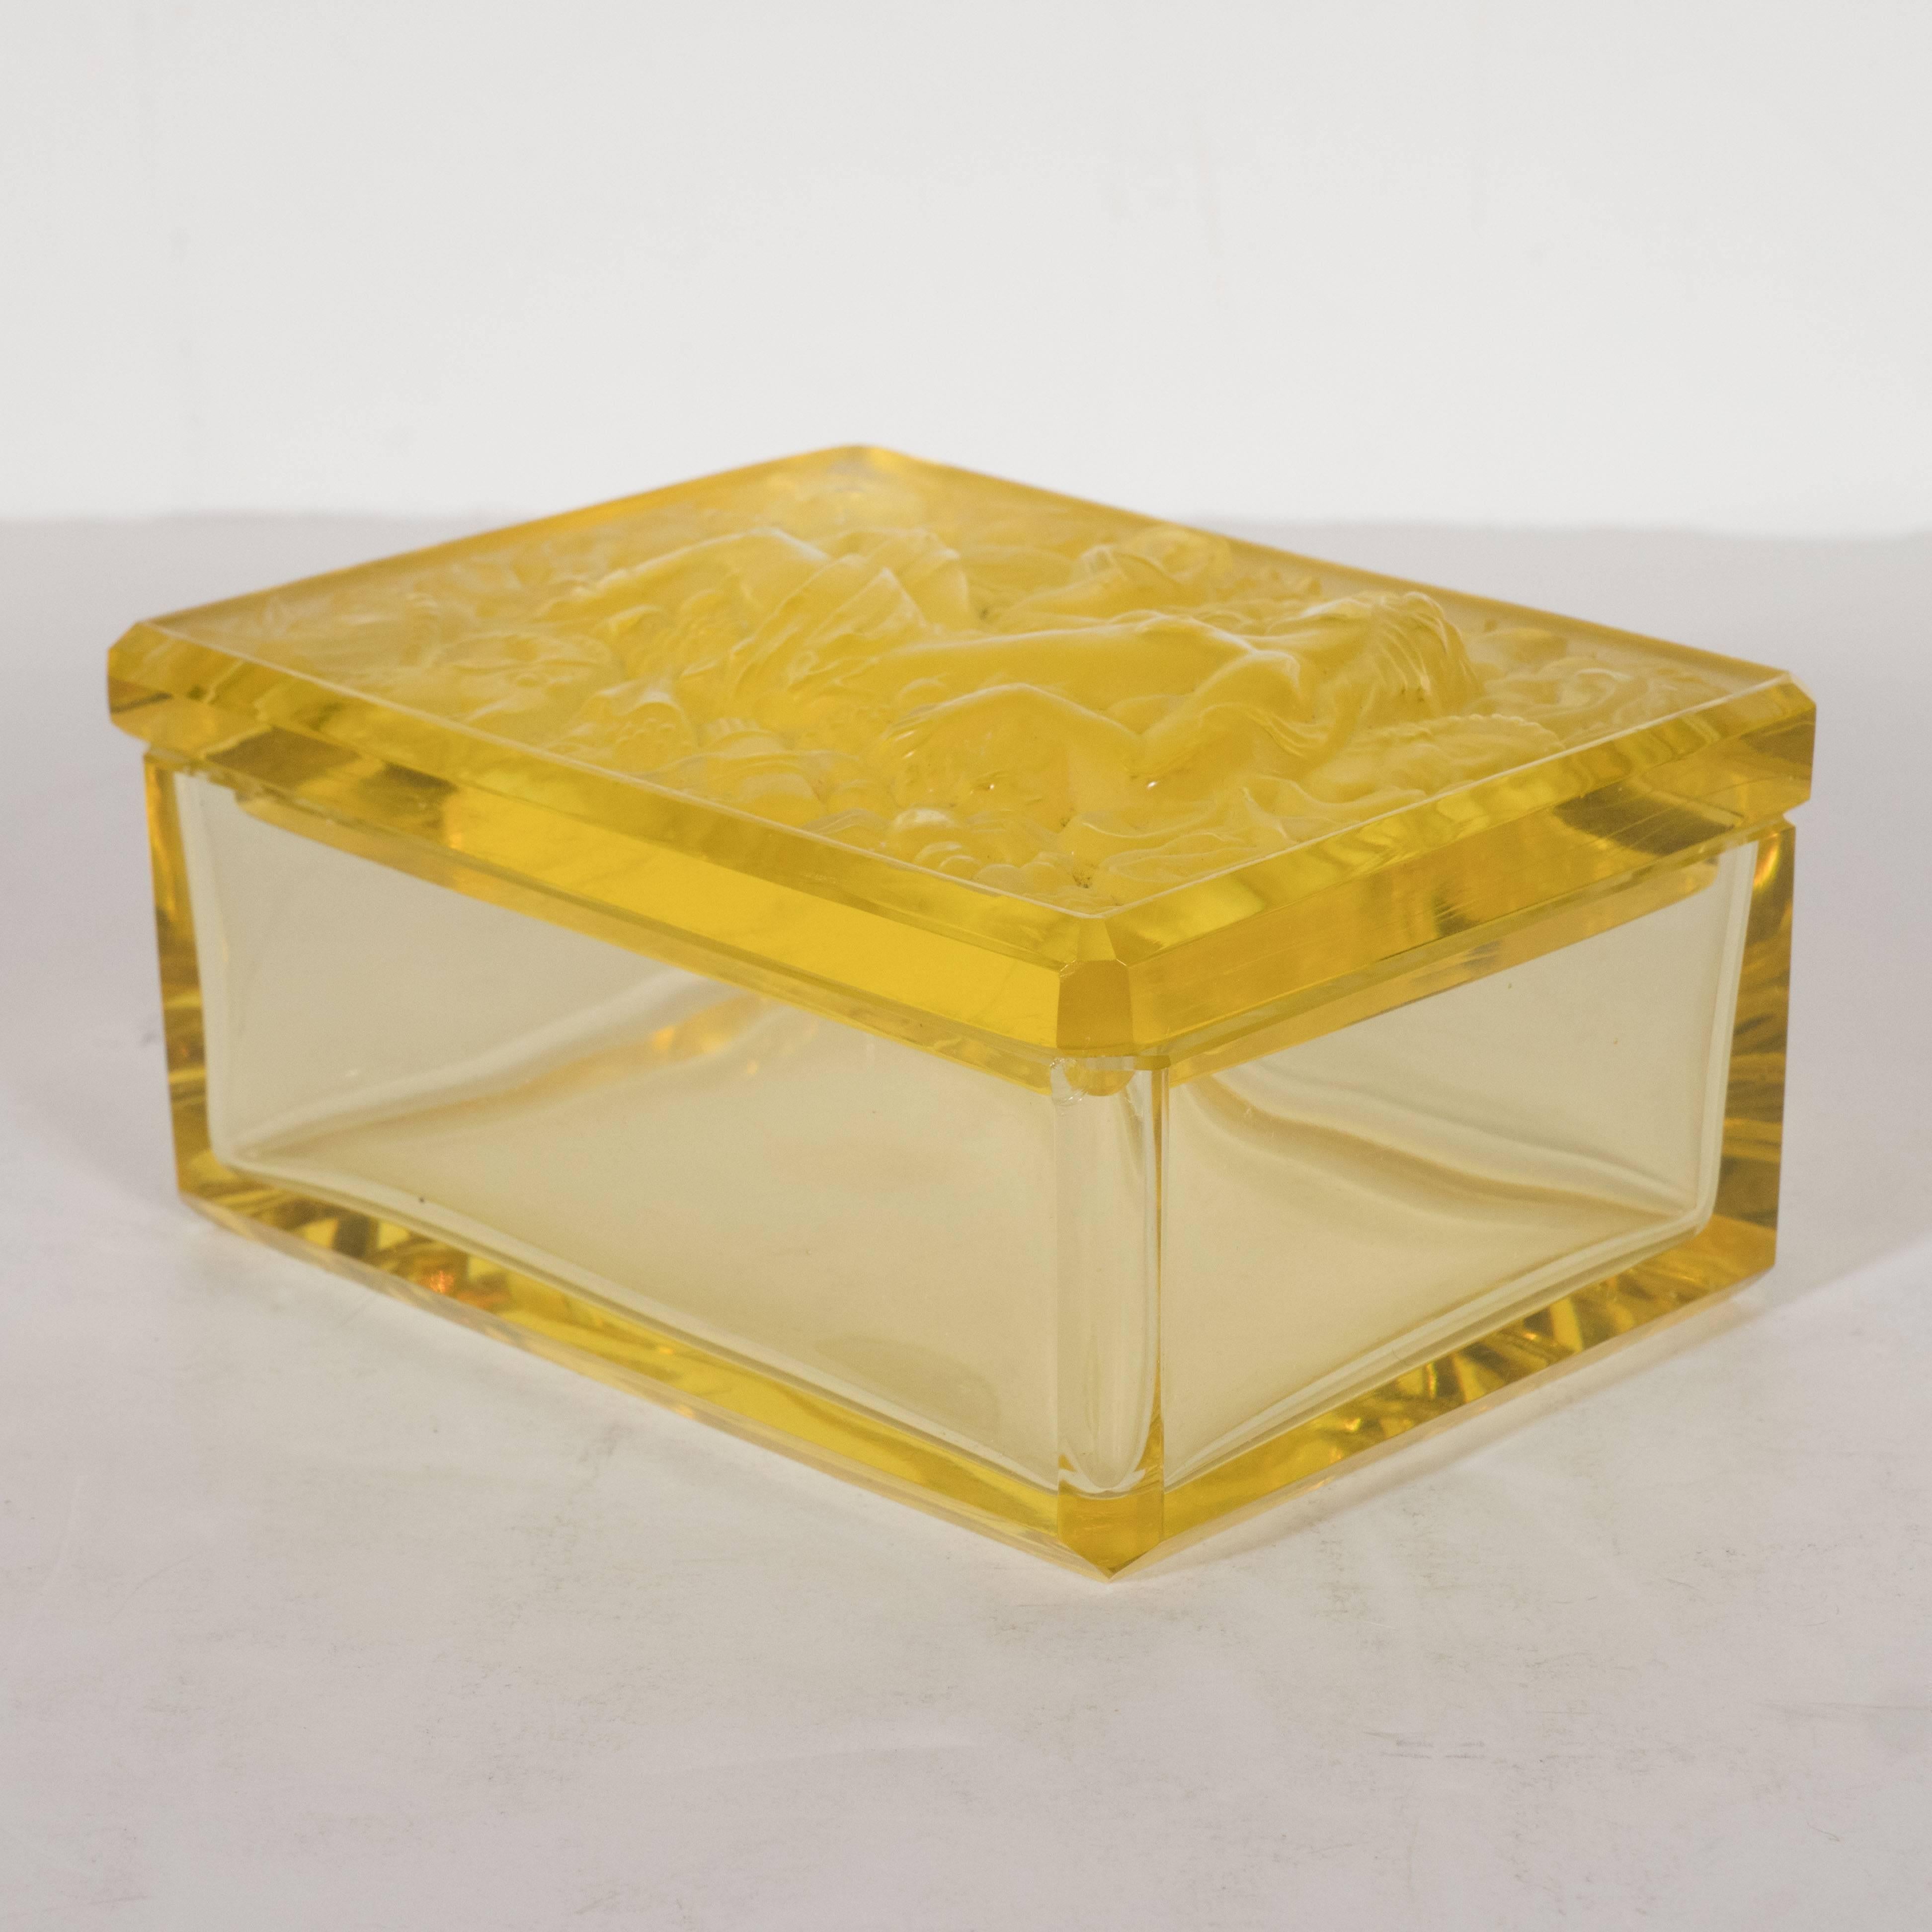 This stunning French Art Deco citrine box features translucent sides, beveled corners and a lid adorned with an exuberance of raised designs in frosted glass. In the center, there is a greek goddess in repose. A toga is draped over her lower